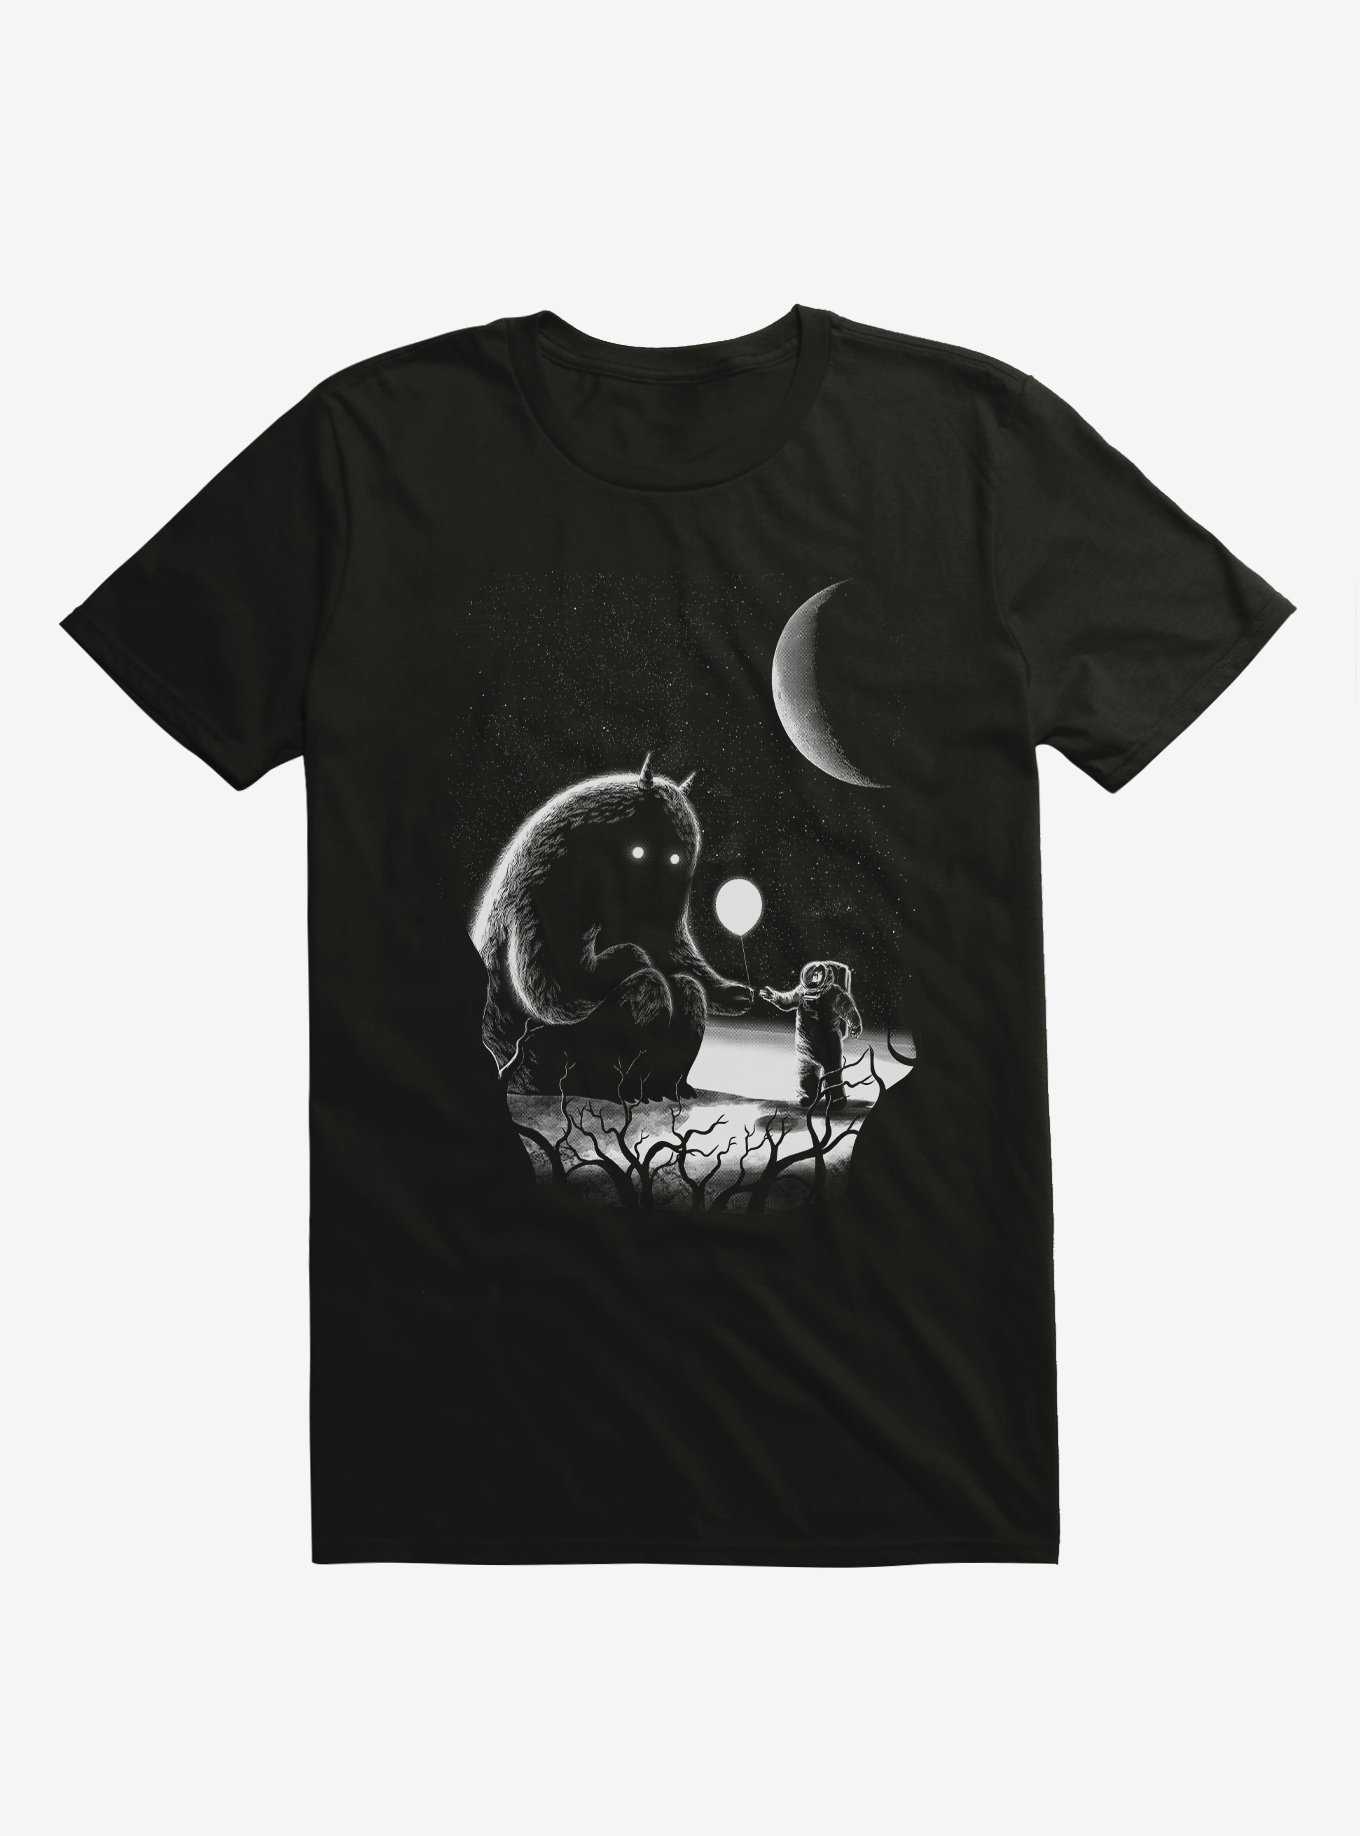 The Guest Astronaut And Extraterrestrial Black T-Shirt, , hi-res